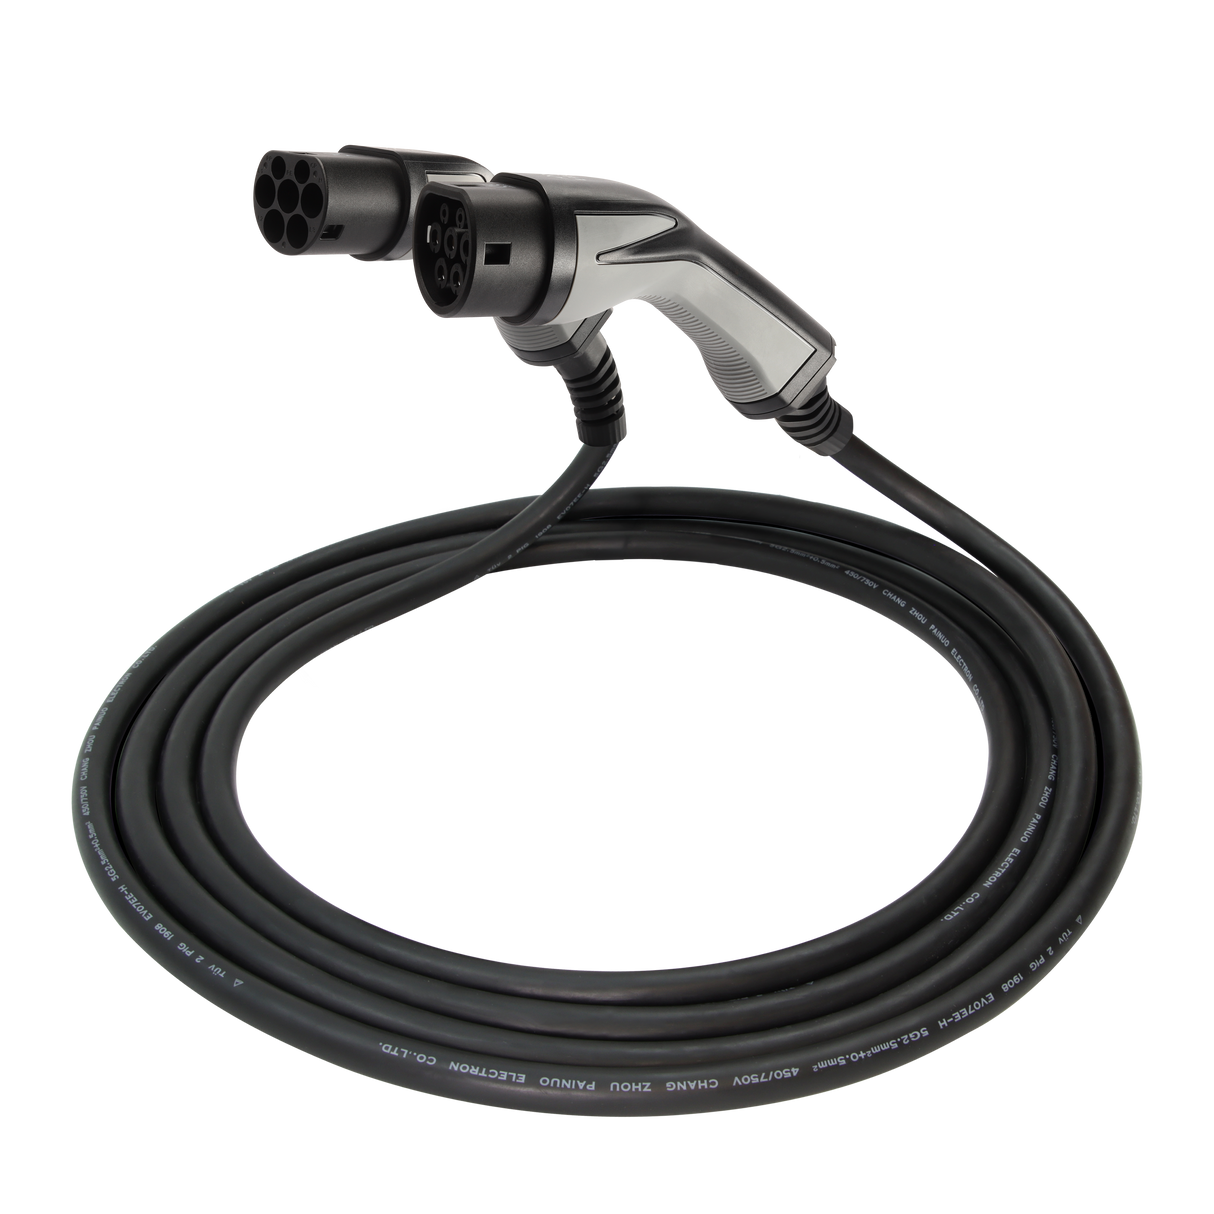 Charging cable Byd Tang - Erock Pro Type 2 - 32A 1 phase (7.4 kW)